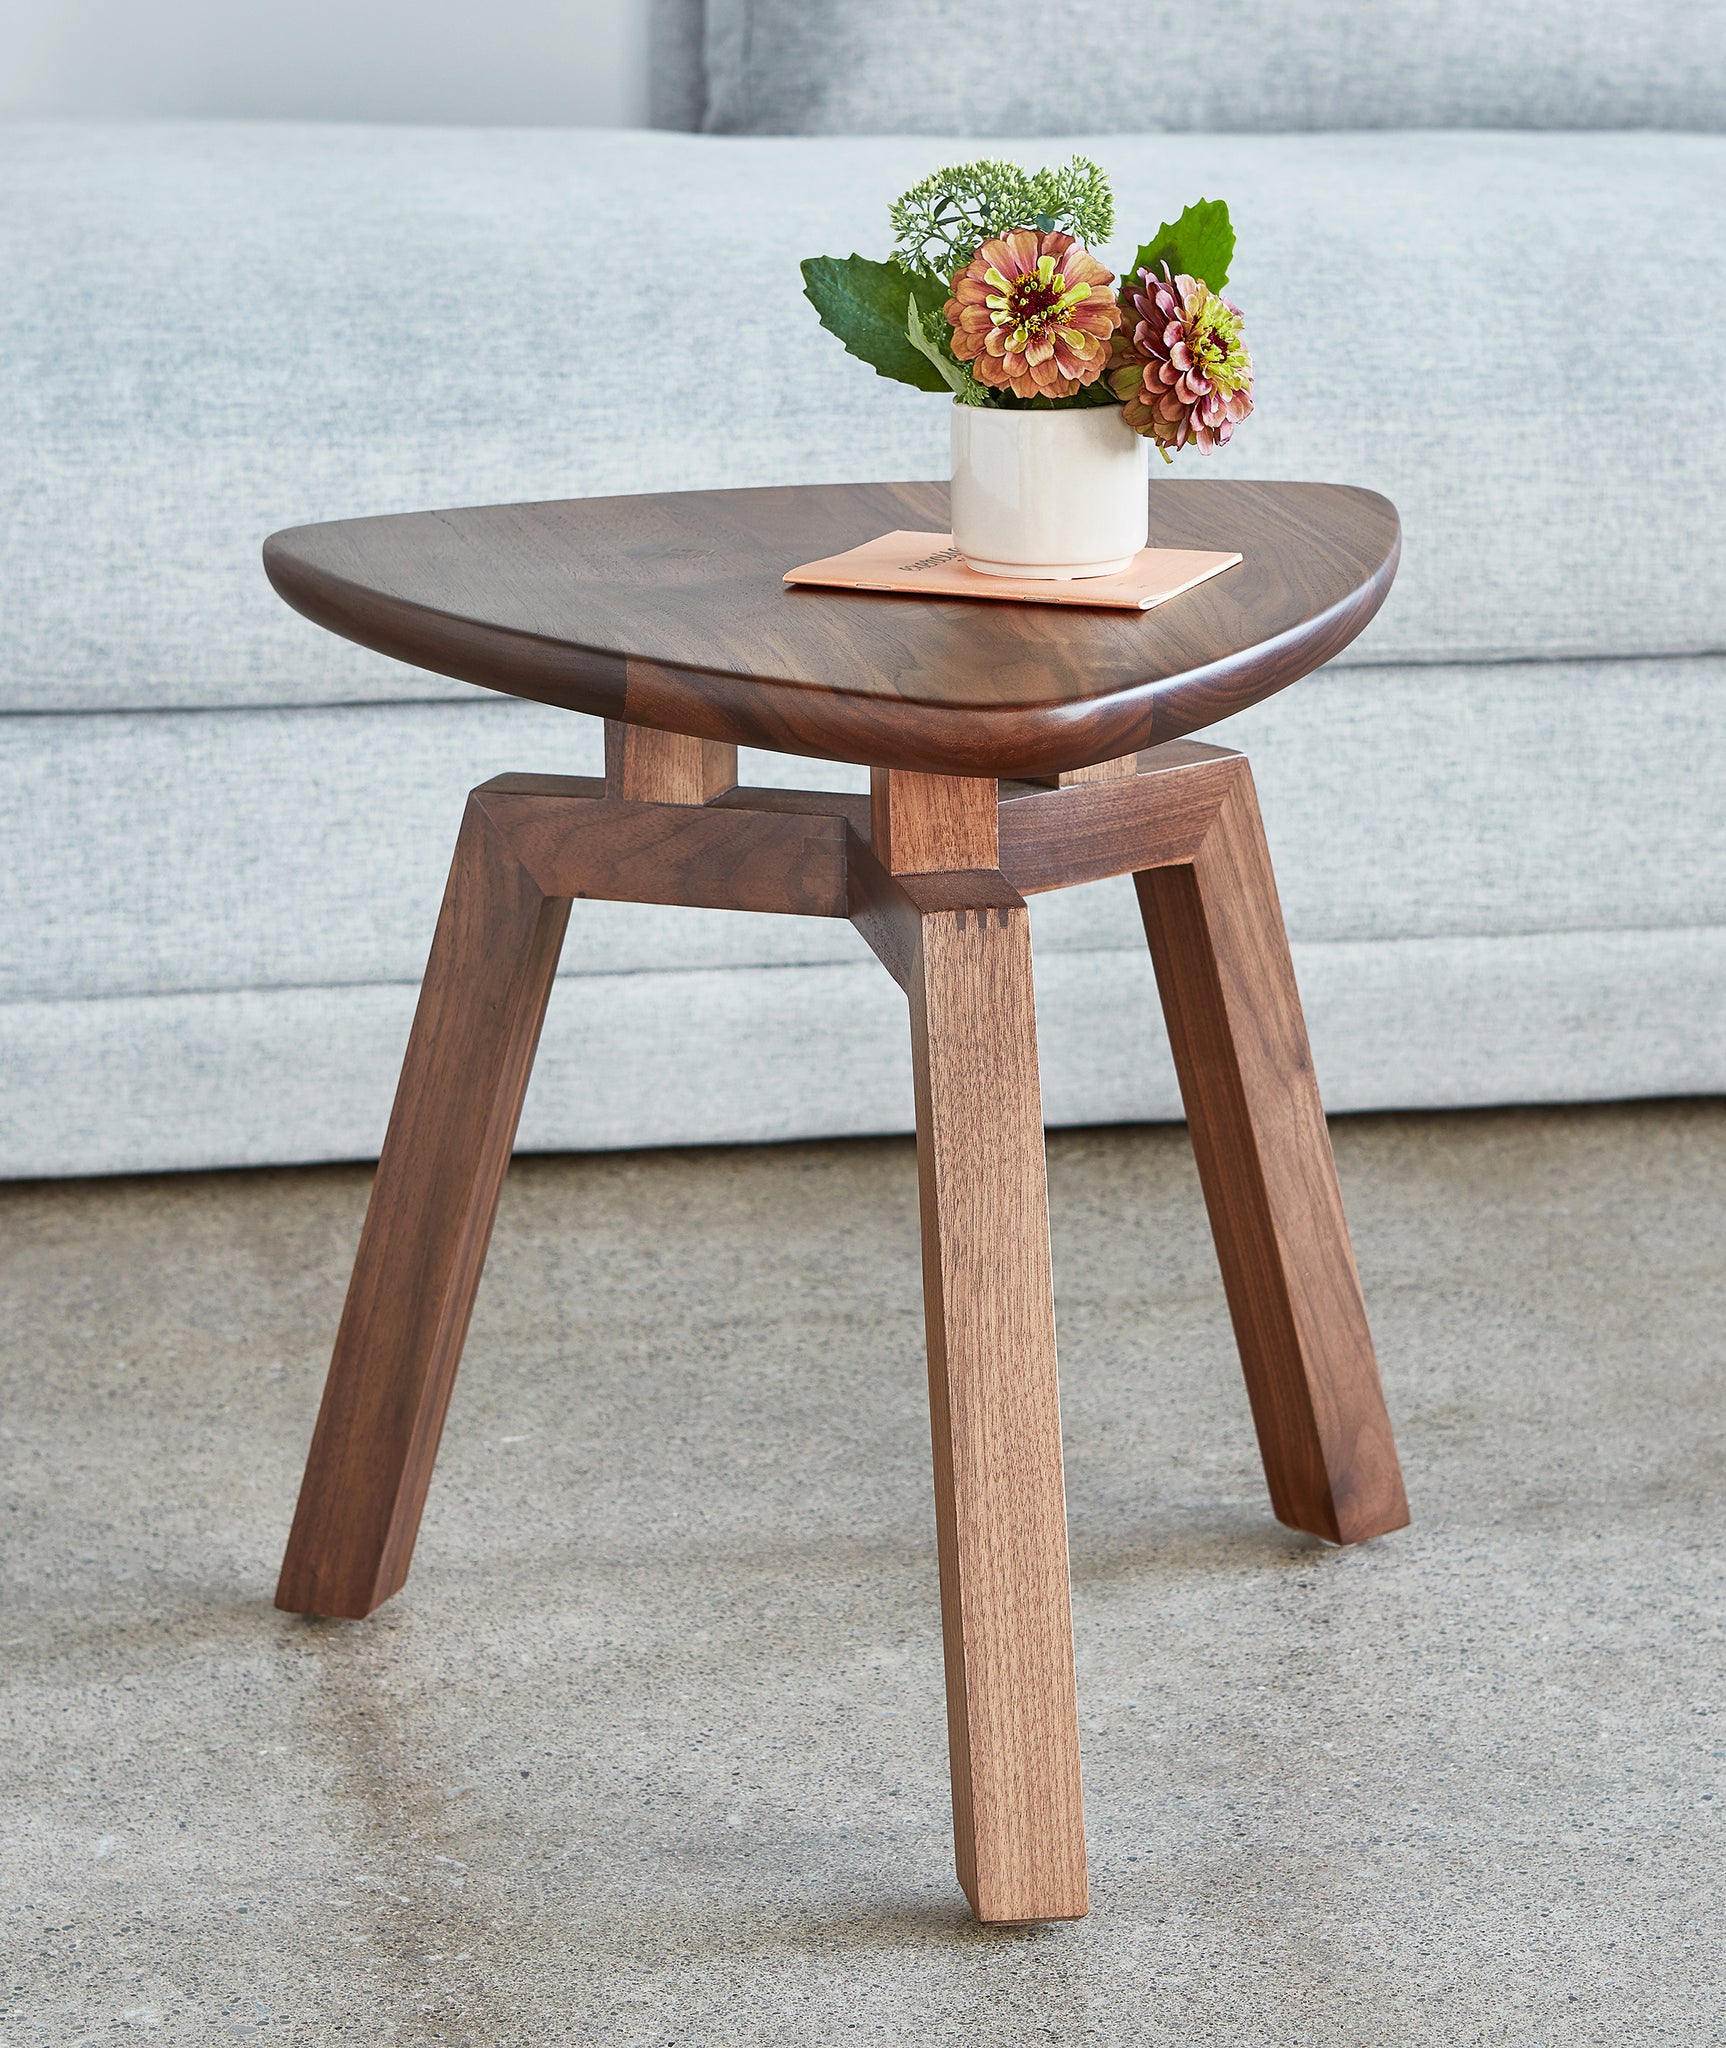 Solana Triangular End Table - More Options